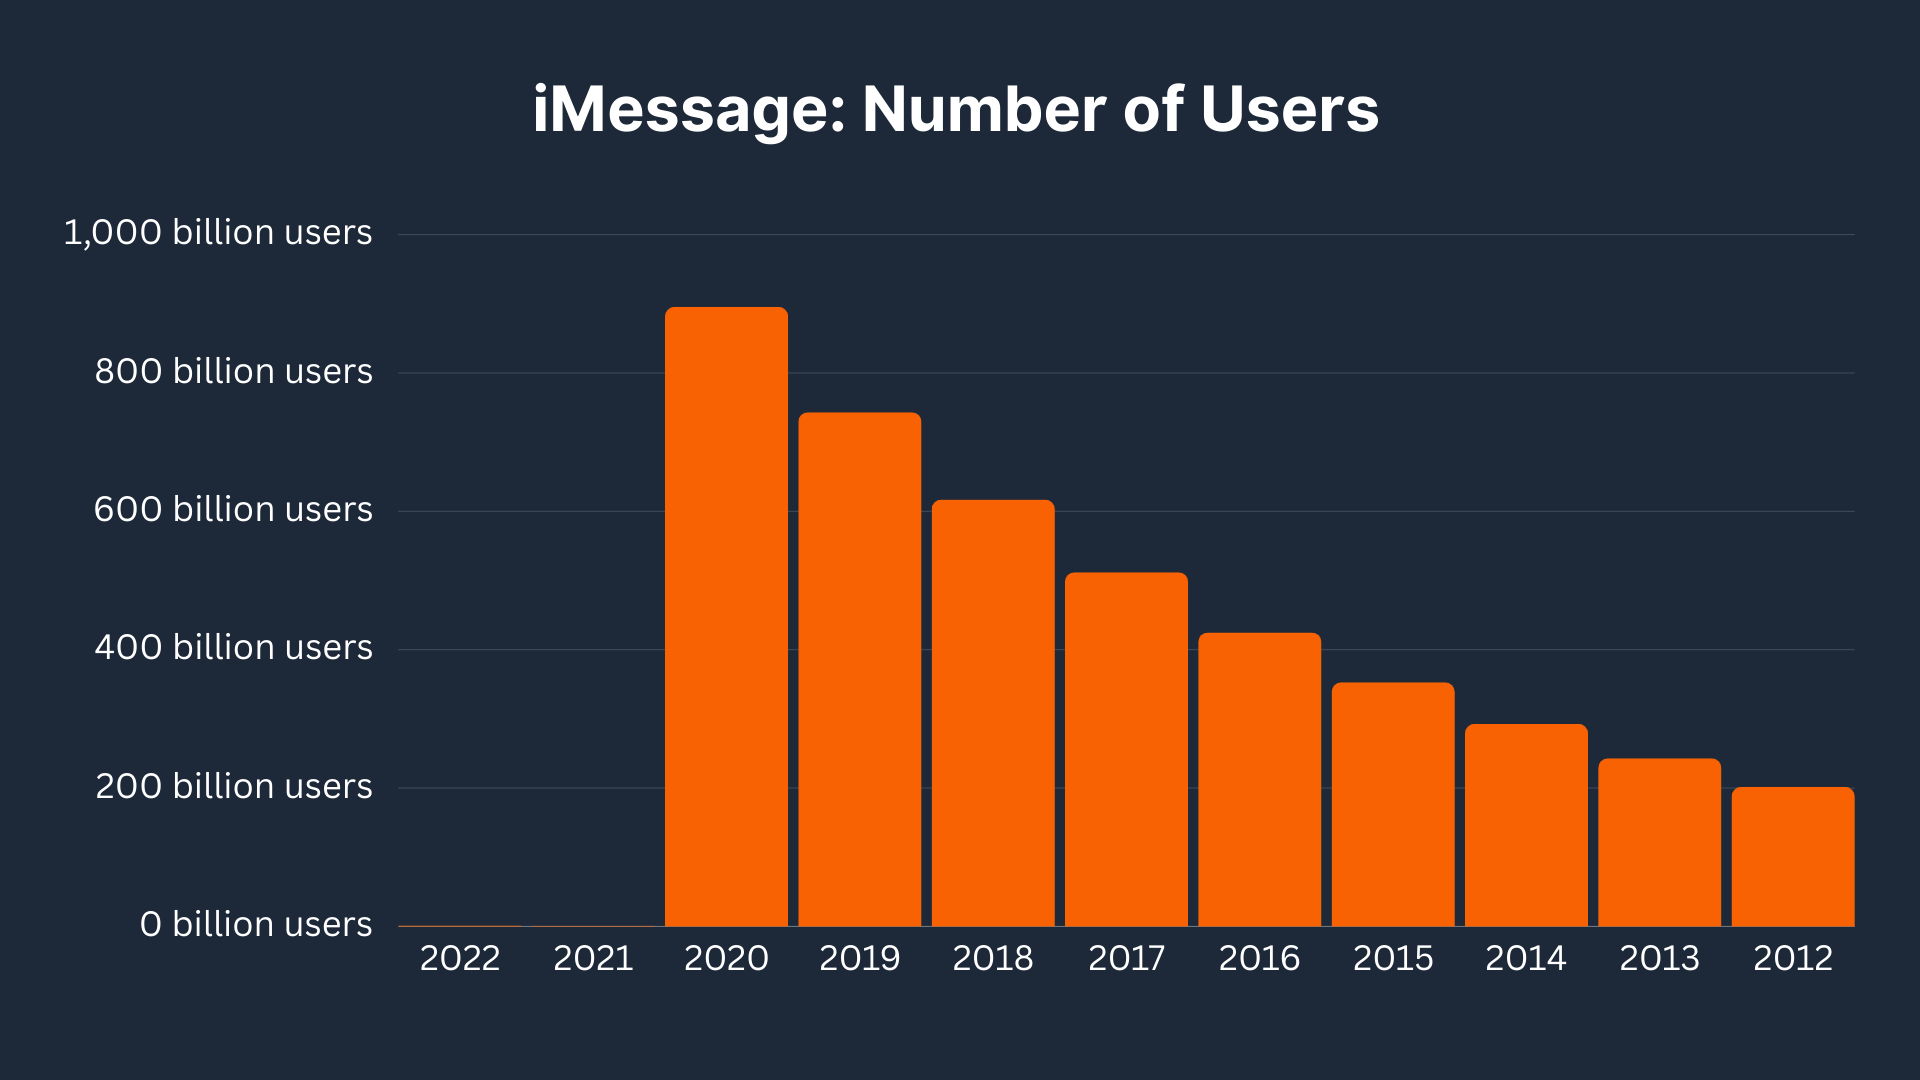 iMessage: Number of Users